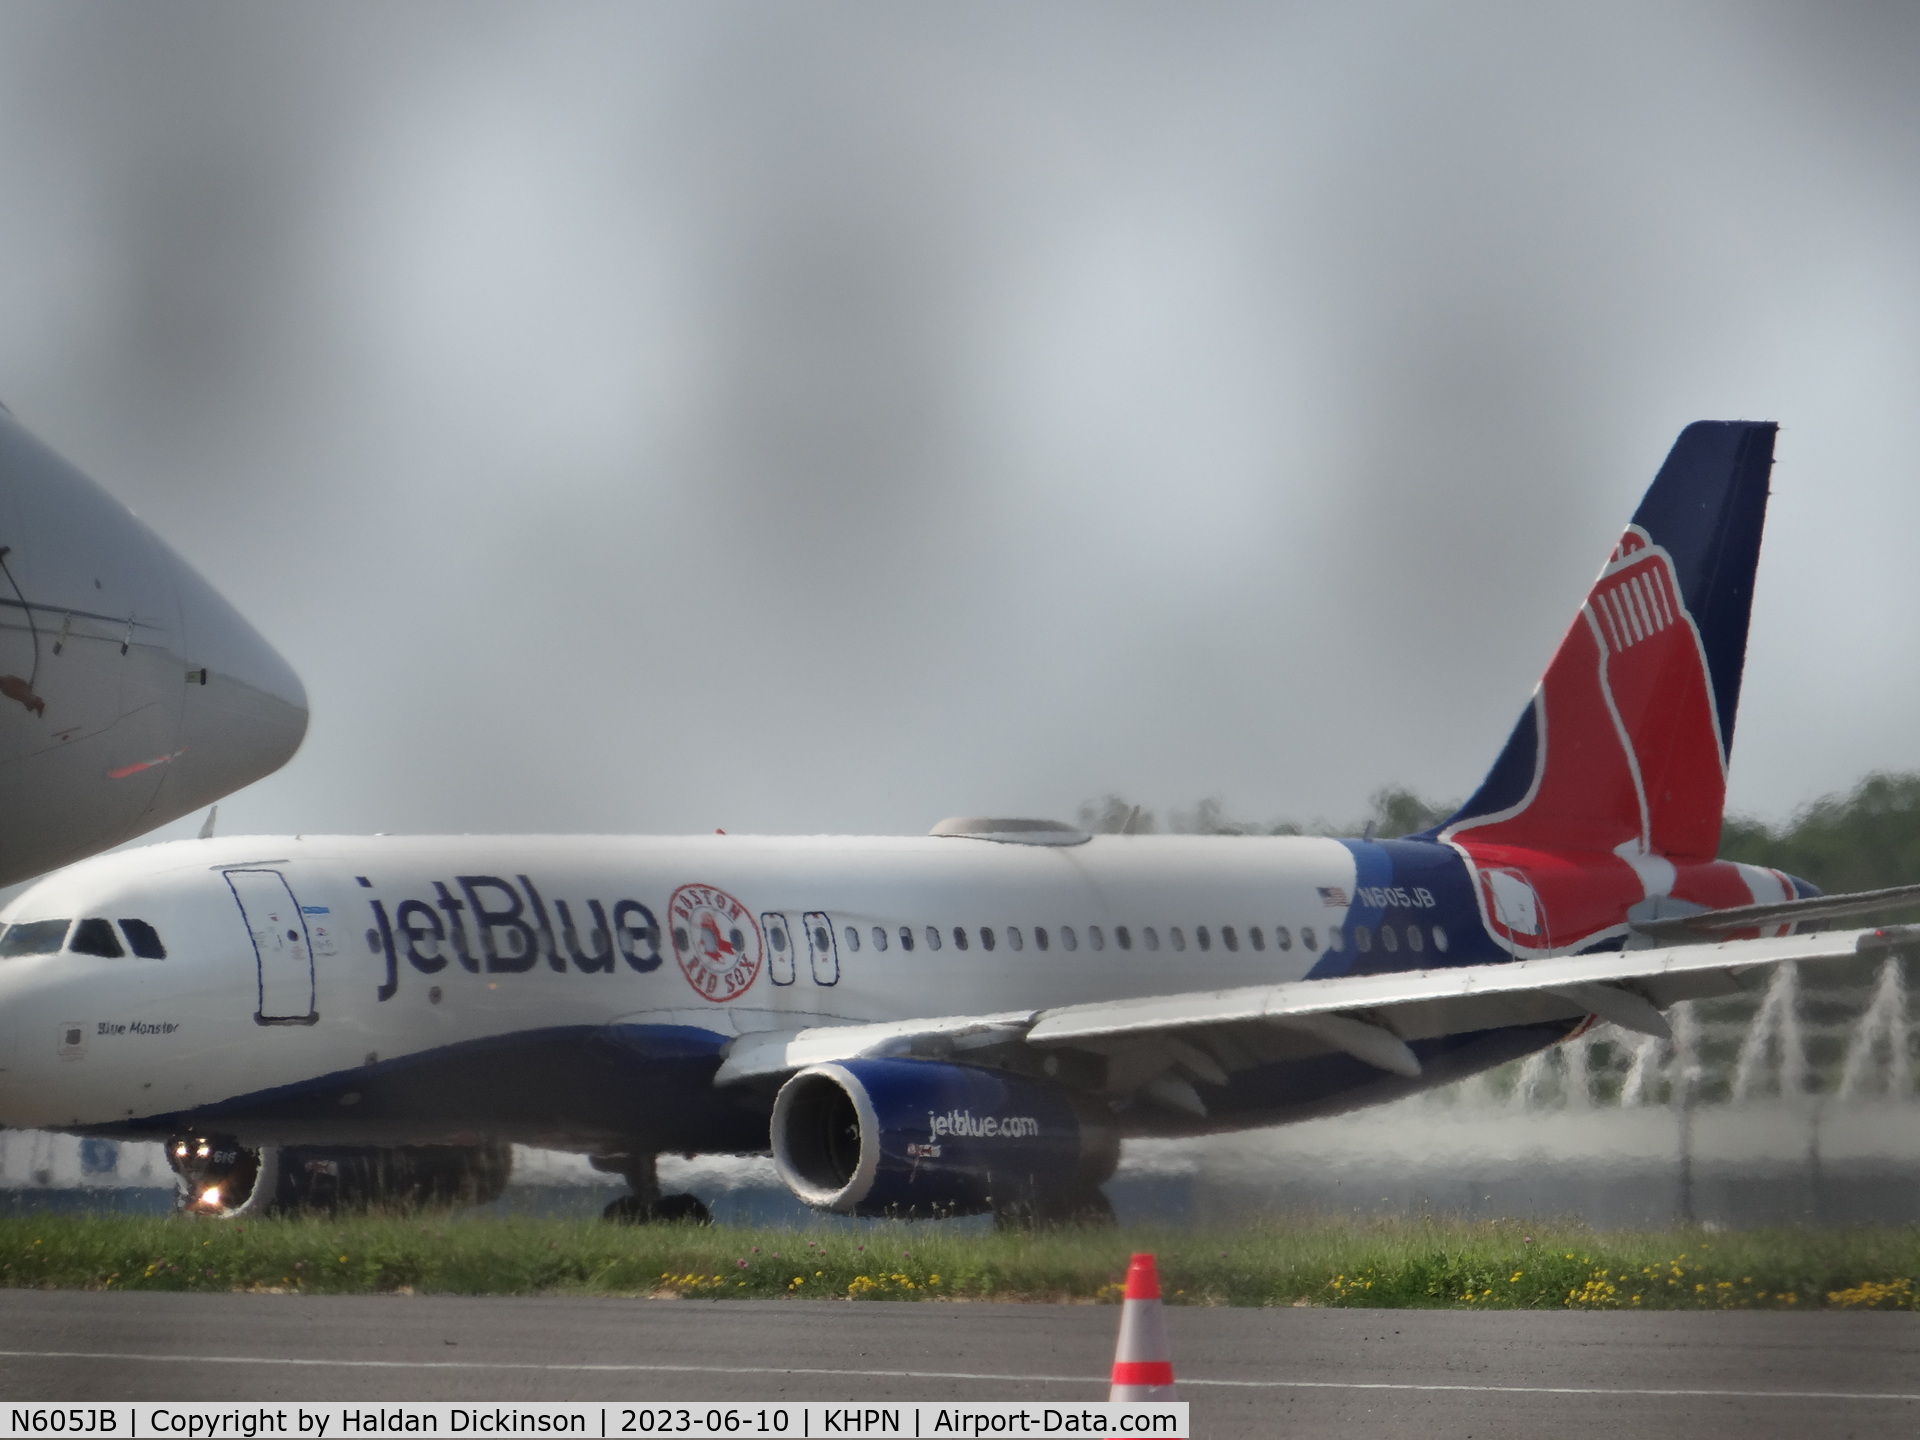 N605JB, 2005 Airbus A320-232 C/N 2368, 2005 Airbus A320-232
JetBlue Red Sox Livery
Taxi